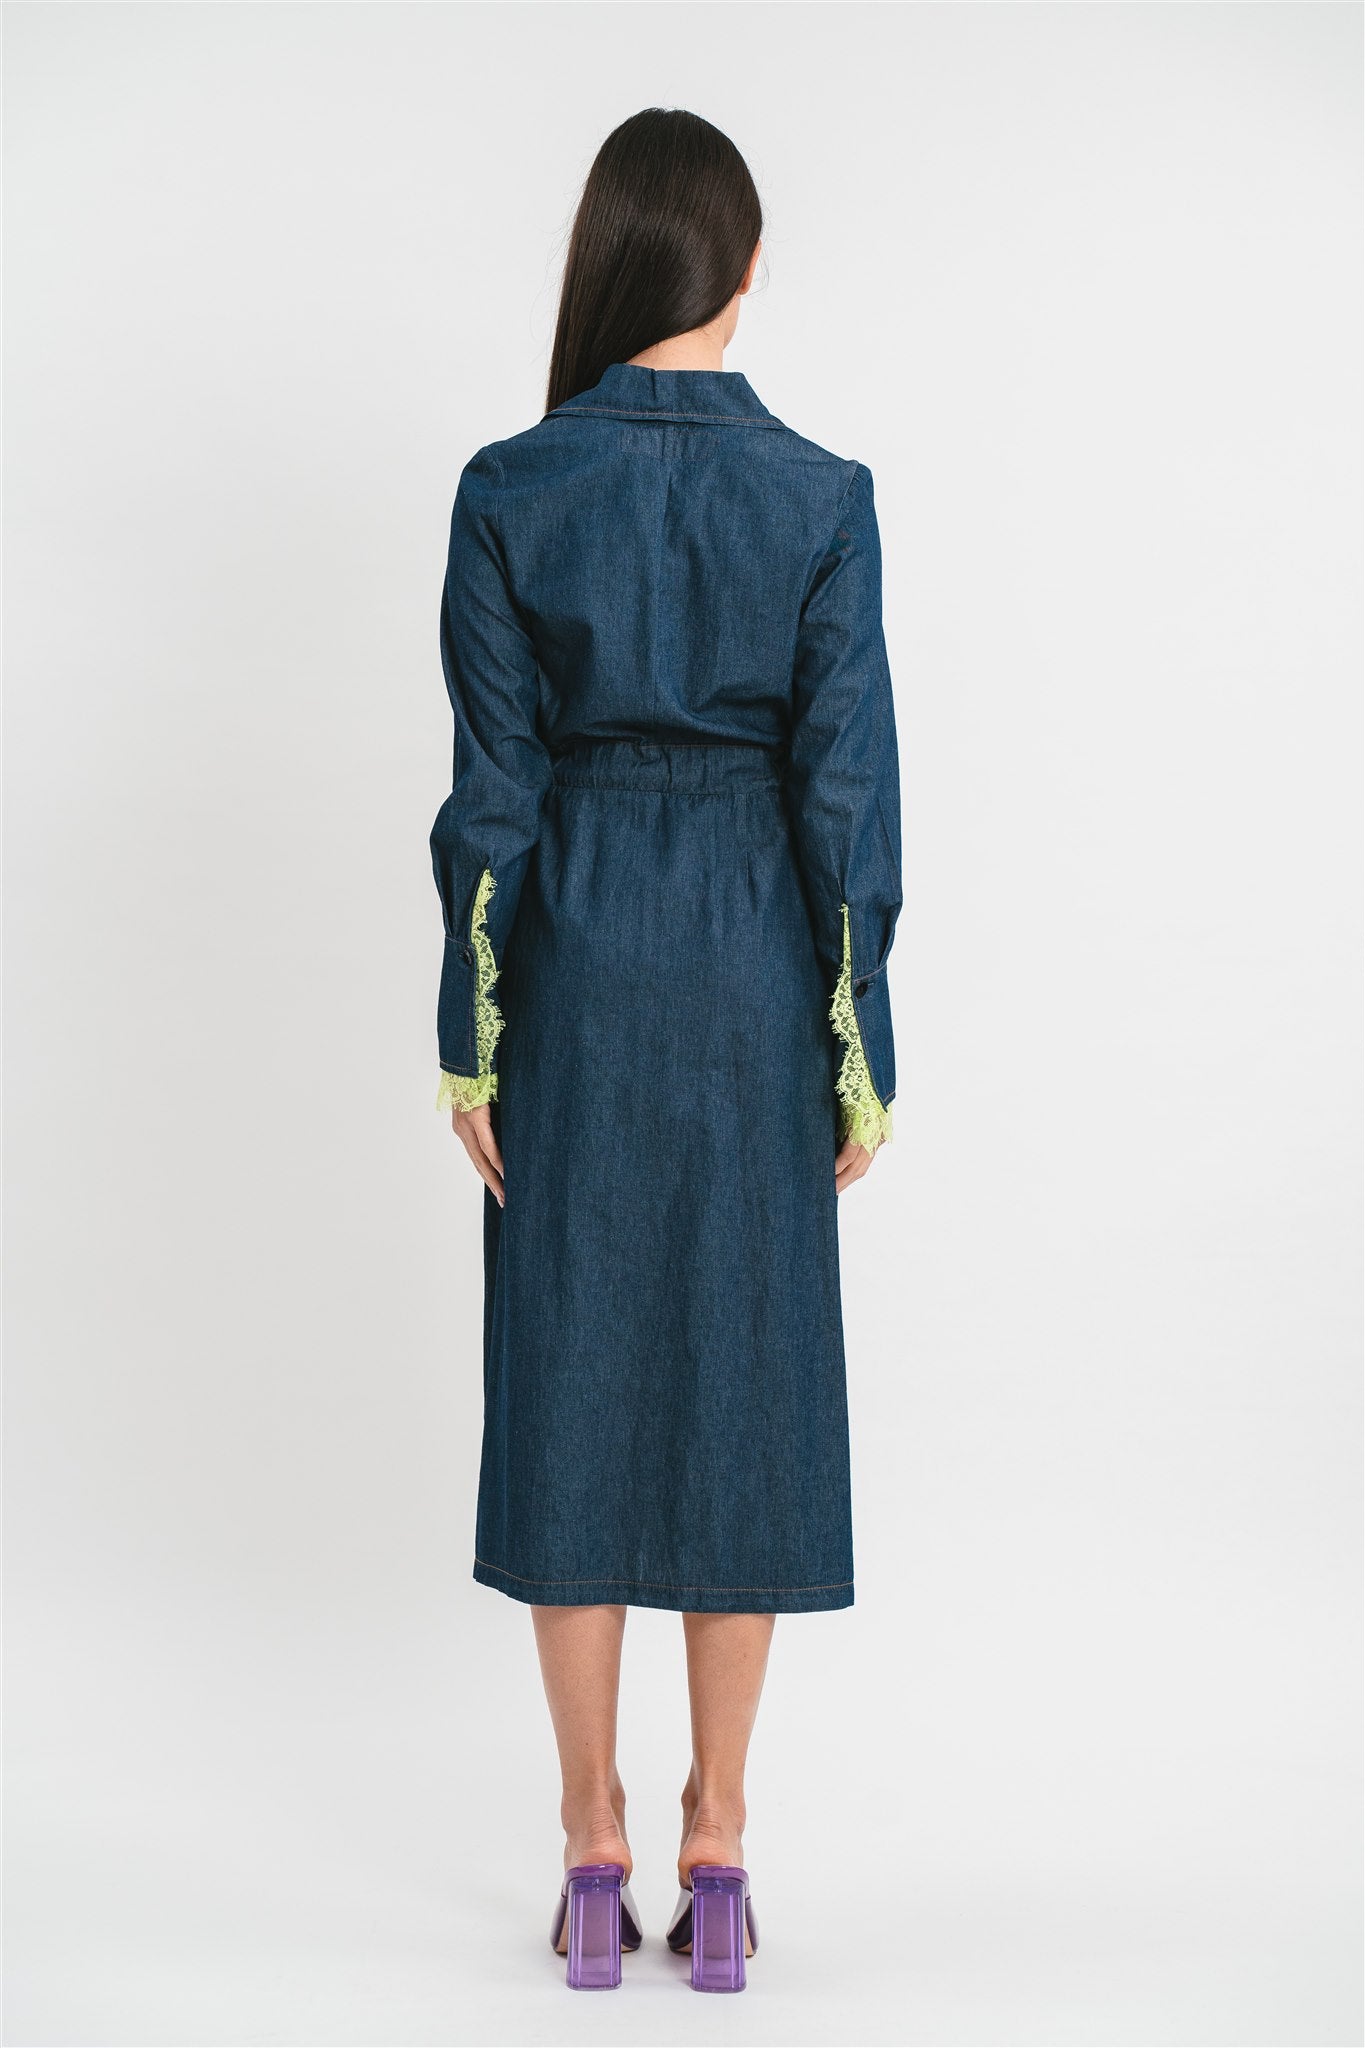 Lightweight denim chemisier dress with contrasting belt and lace